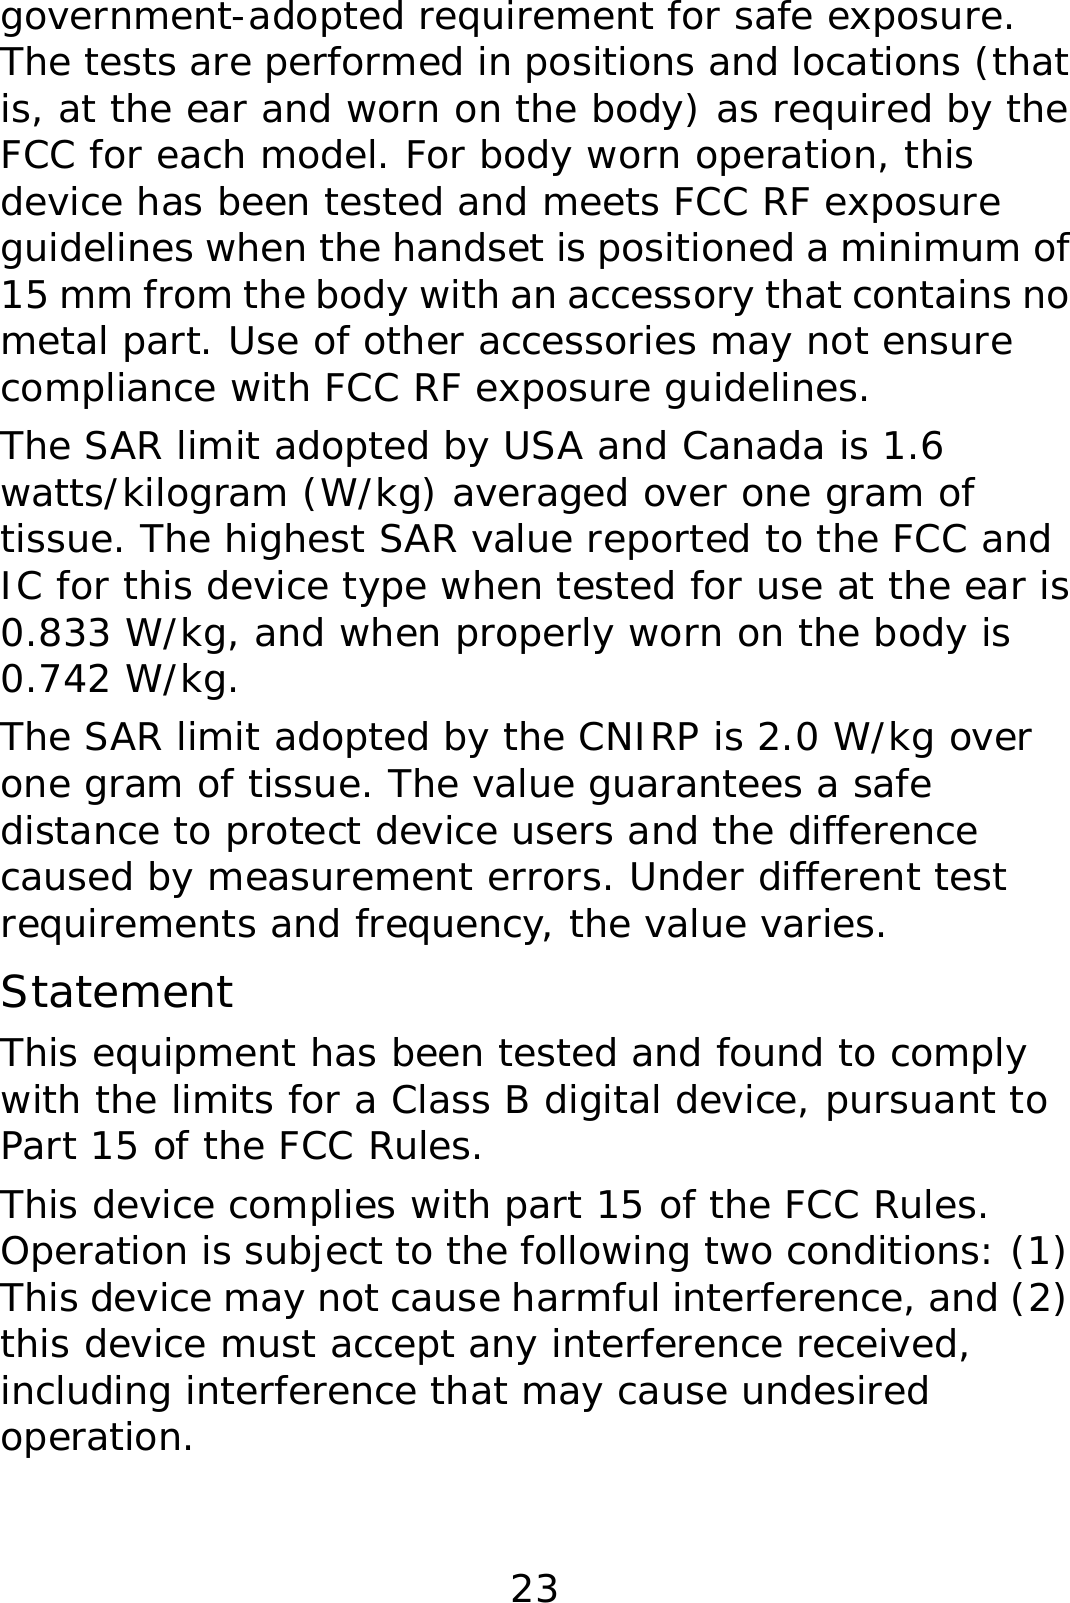 23 government-adopted requirement for safe exposure. The tests are performed in positions and locations (that is, at the ear and worn on the body) as required by the FCC for each model. For body worn operation, this device has been tested and meets FCC RF exposure guidelines when the handset is positioned a minimum of 15 mm from the body with an accessory that contains no metal part. Use of other accessories may not ensure compliance with FCC RF exposure guidelines. The SAR limit adopted by USA and Canada is 1.6 watts/kilogram (W/kg) averaged over one gram of tissue. The highest SAR value reported to the FCC and IC for this device type when tested for use at the ear is 0.833 W/kg, and when properly worn on the body is 0.742 W/kg. The SAR limit adopted by the CNIRP is 2.0 W/kg over one gram of tissue. The value guarantees a safe distance to protect device users and the difference caused by measurement errors. Under different test requirements and frequency, the value varies.  Statement This equipment has been tested and found to comply with the limits for a Class B digital device, pursuant to Part 15 of the FCC Rules.  This device complies with part 15 of the FCC Rules. Operation is subject to the following two conditions: (1) This device may not cause harmful interference, and (2) this device must accept any interference received, including interference that may cause undesired operation. 